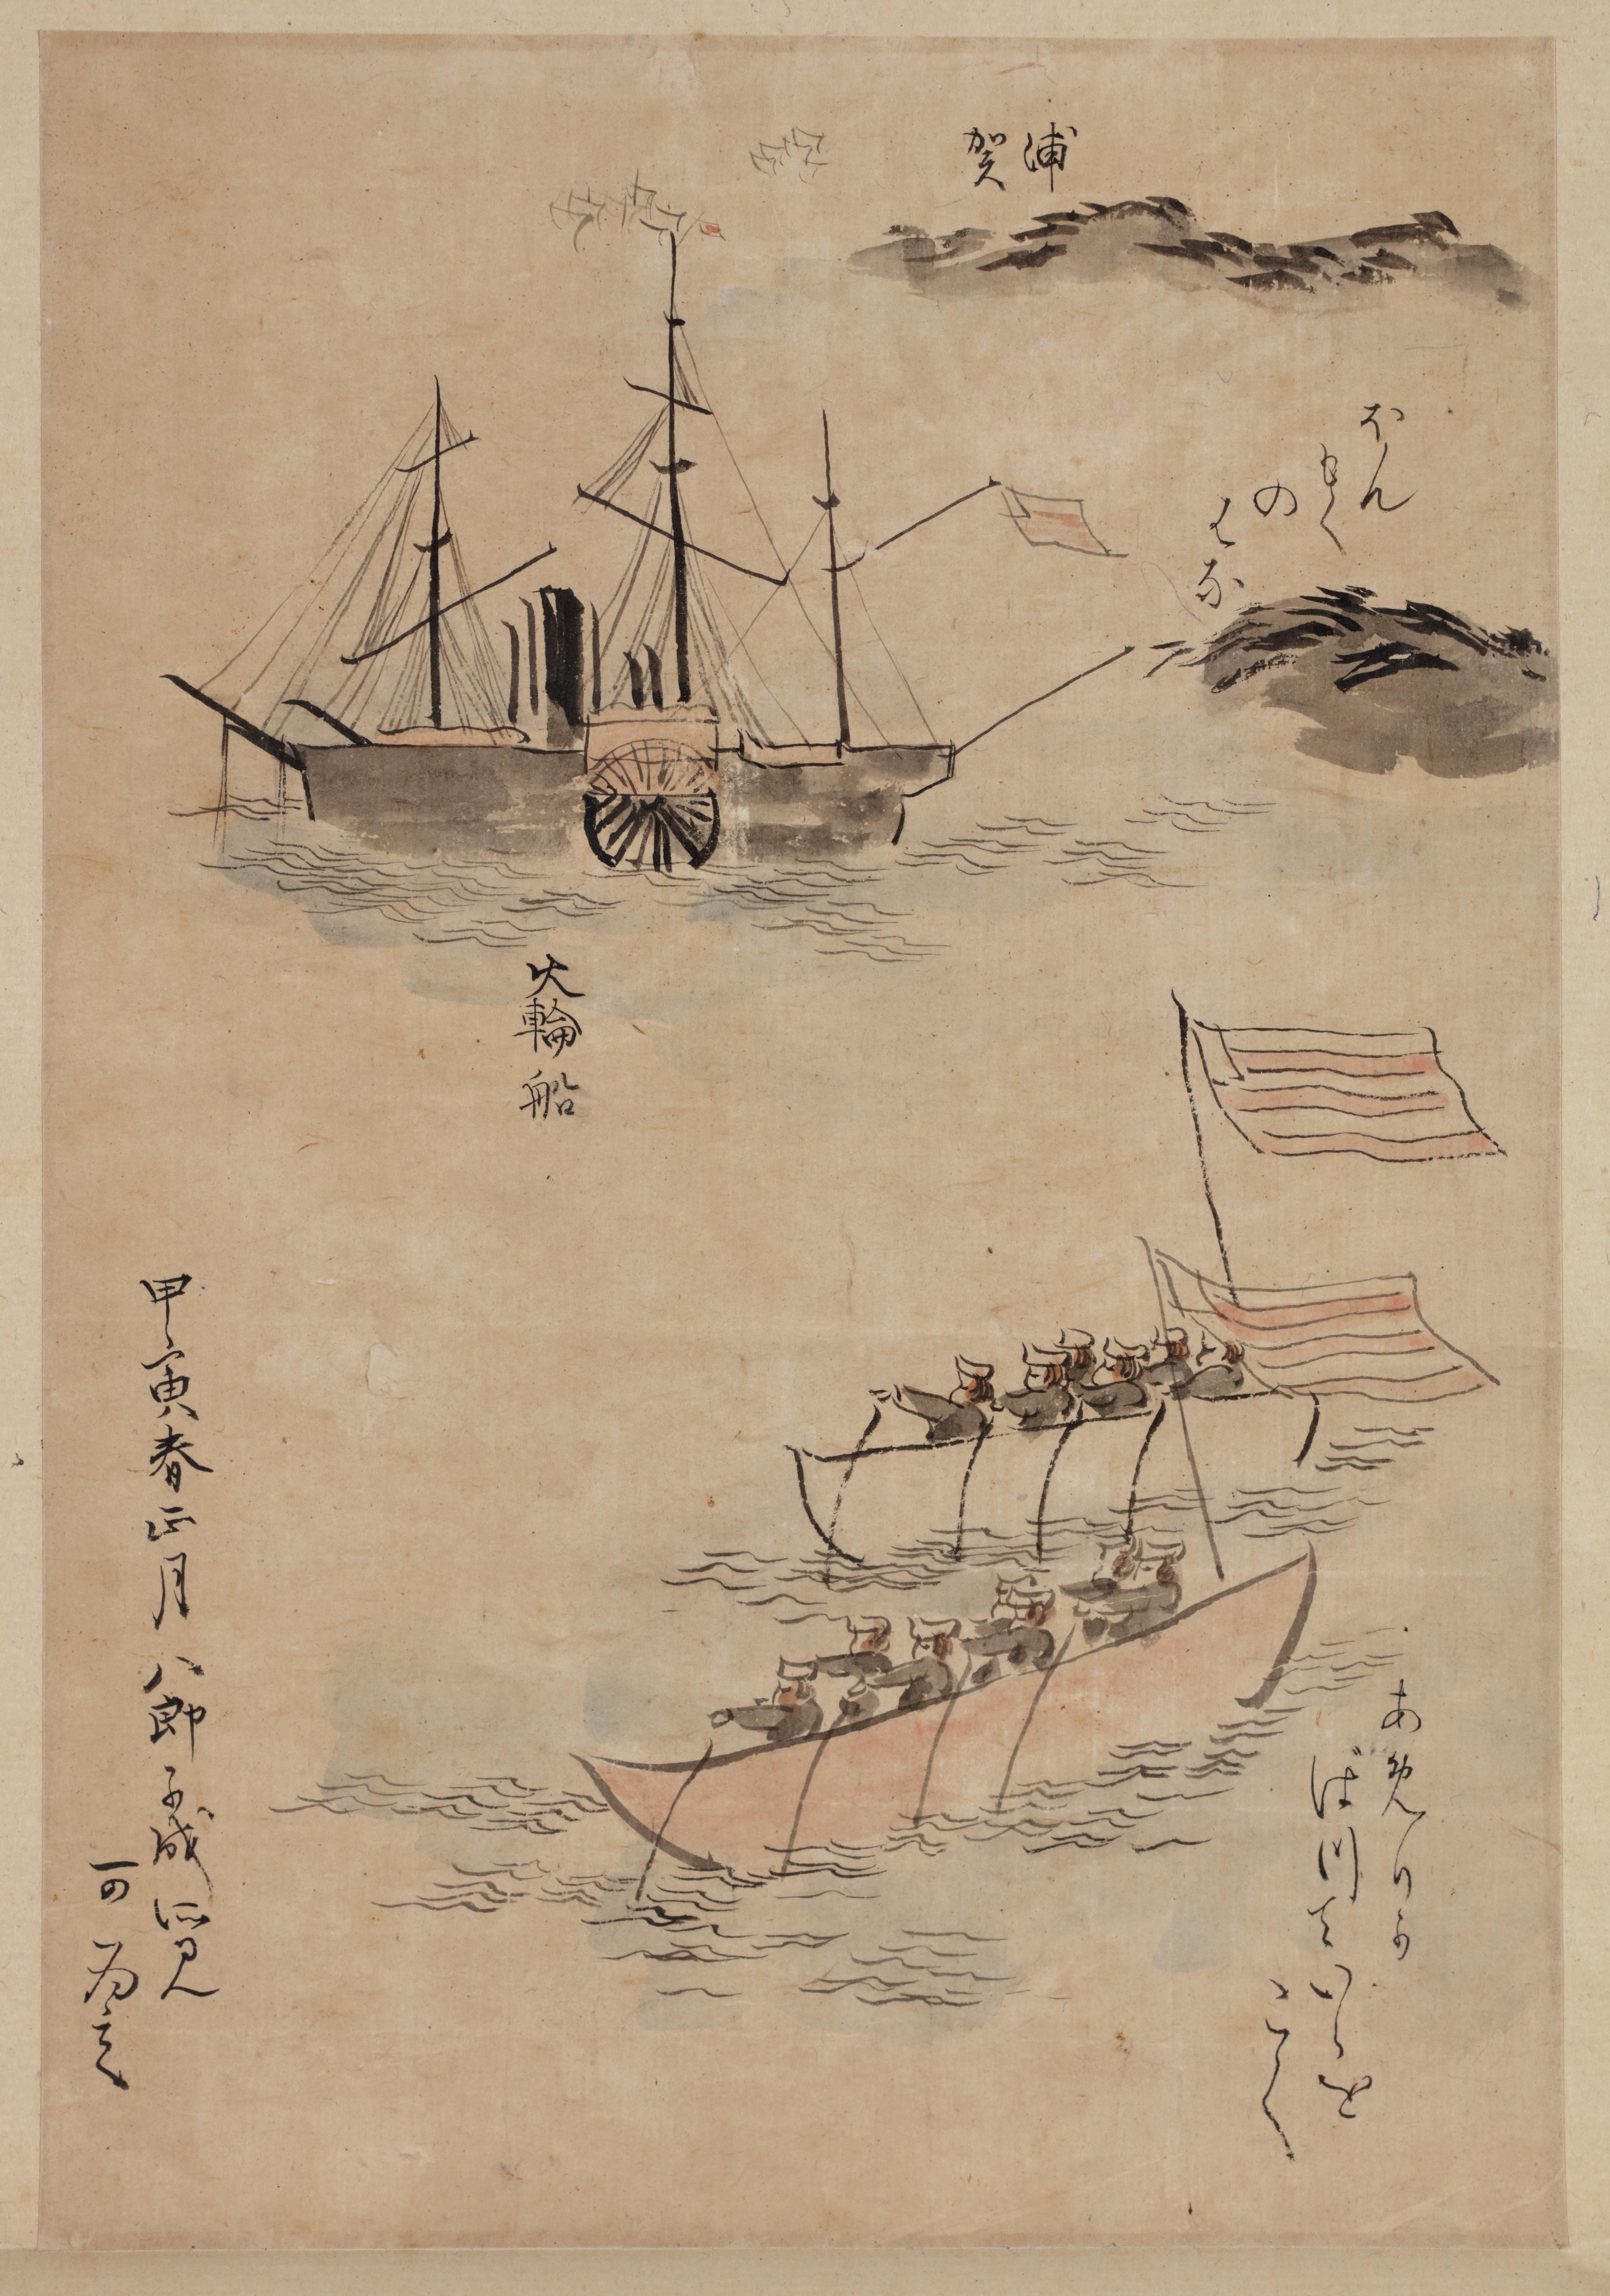 Scroll painting of the American ship commanded by Commodore Matthew Perry - Painting by Ukita Ikkei